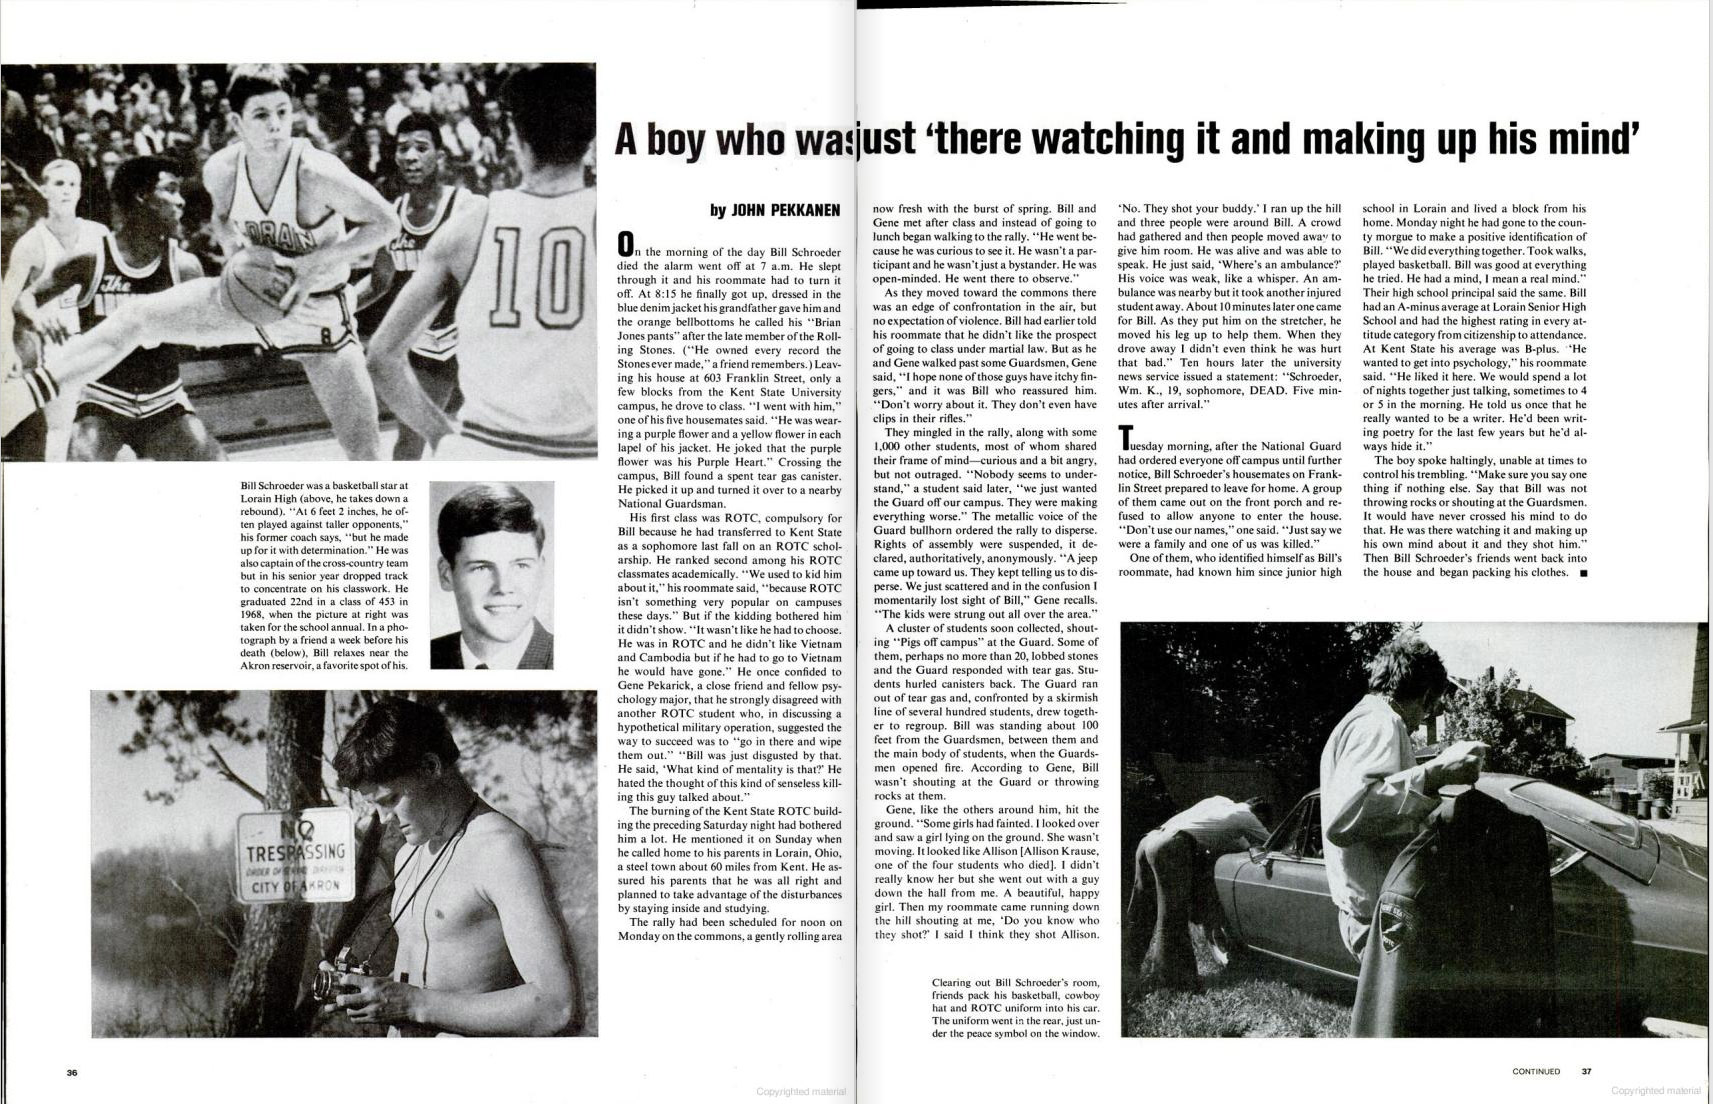 LIFE magazine coverage of Kent State in May 1970.